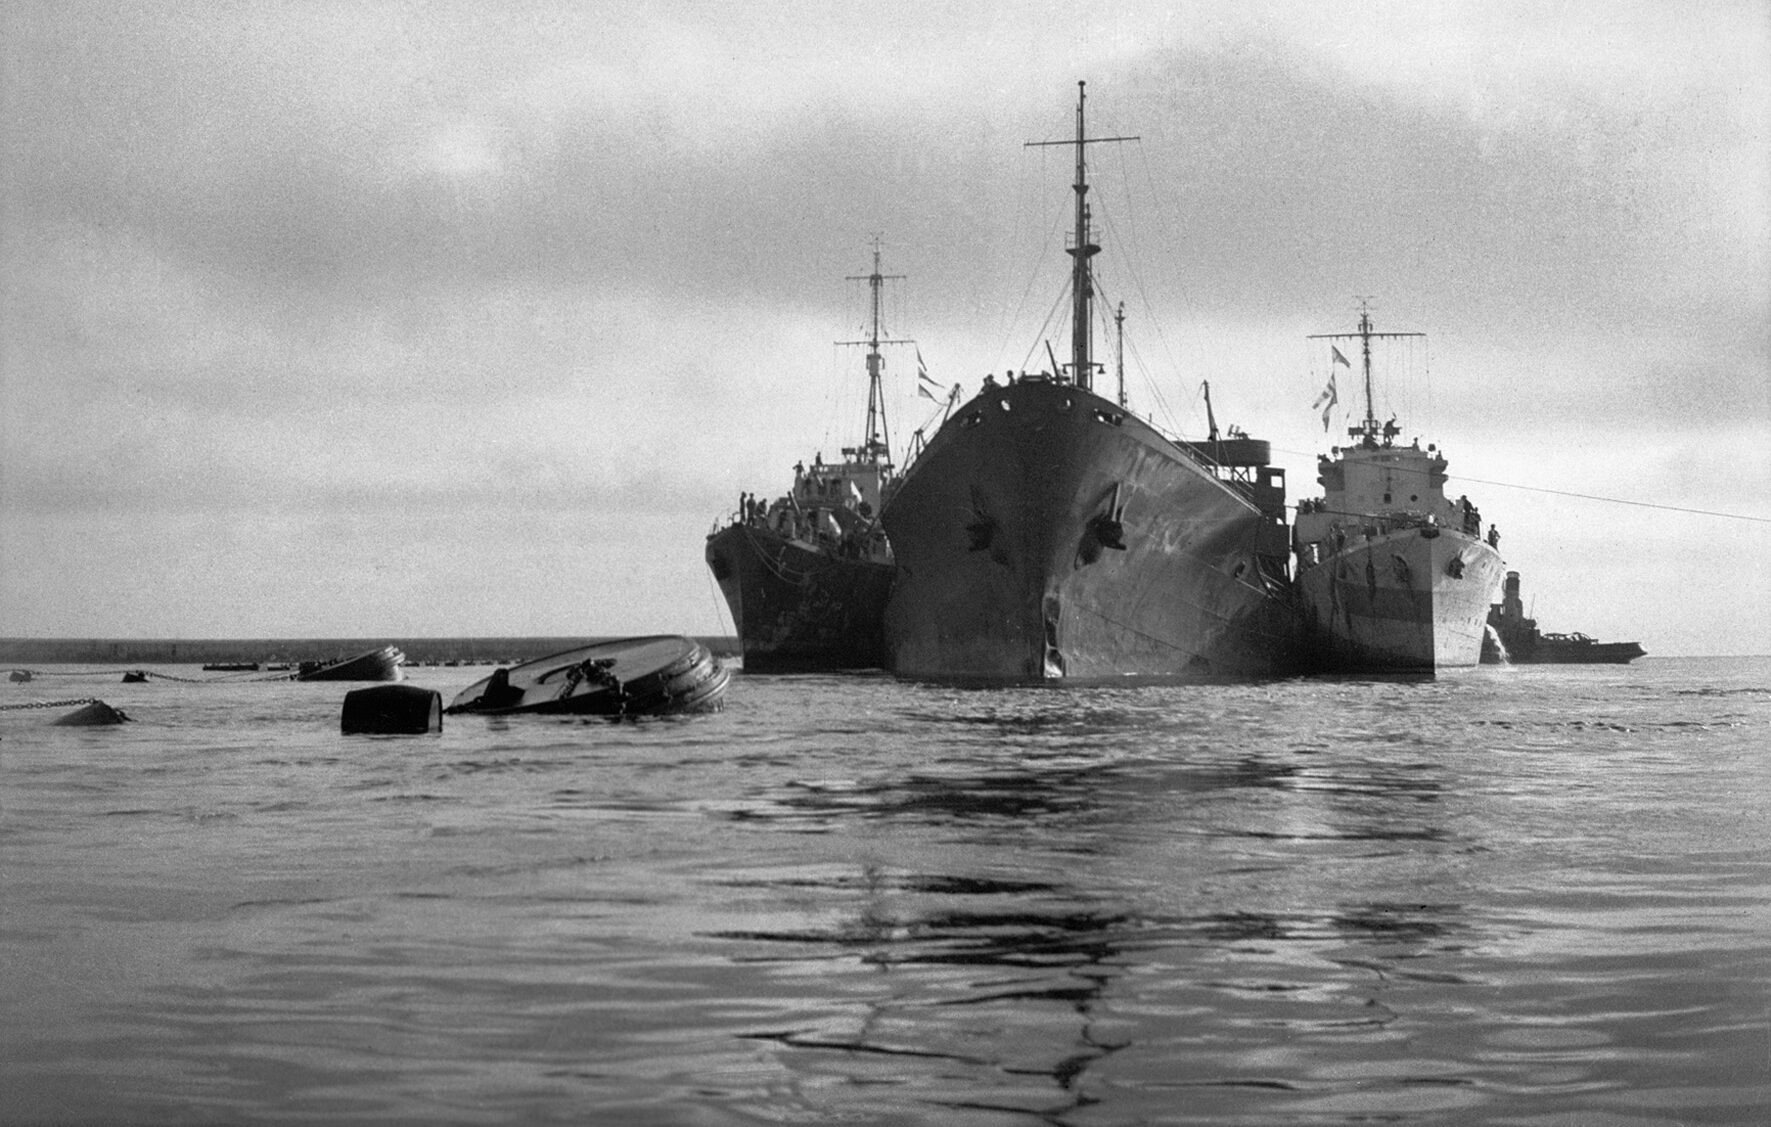 American oil tanker Ohio is supported by two Royal Navy destroyers as it approaches Malta following epic voyage through the Mediterranean, August 1942. Having surviving torpedos, aerial bombardment, and a fire, the Ohio, manned by a British crew, was called “the ship that wouldn’t die.”